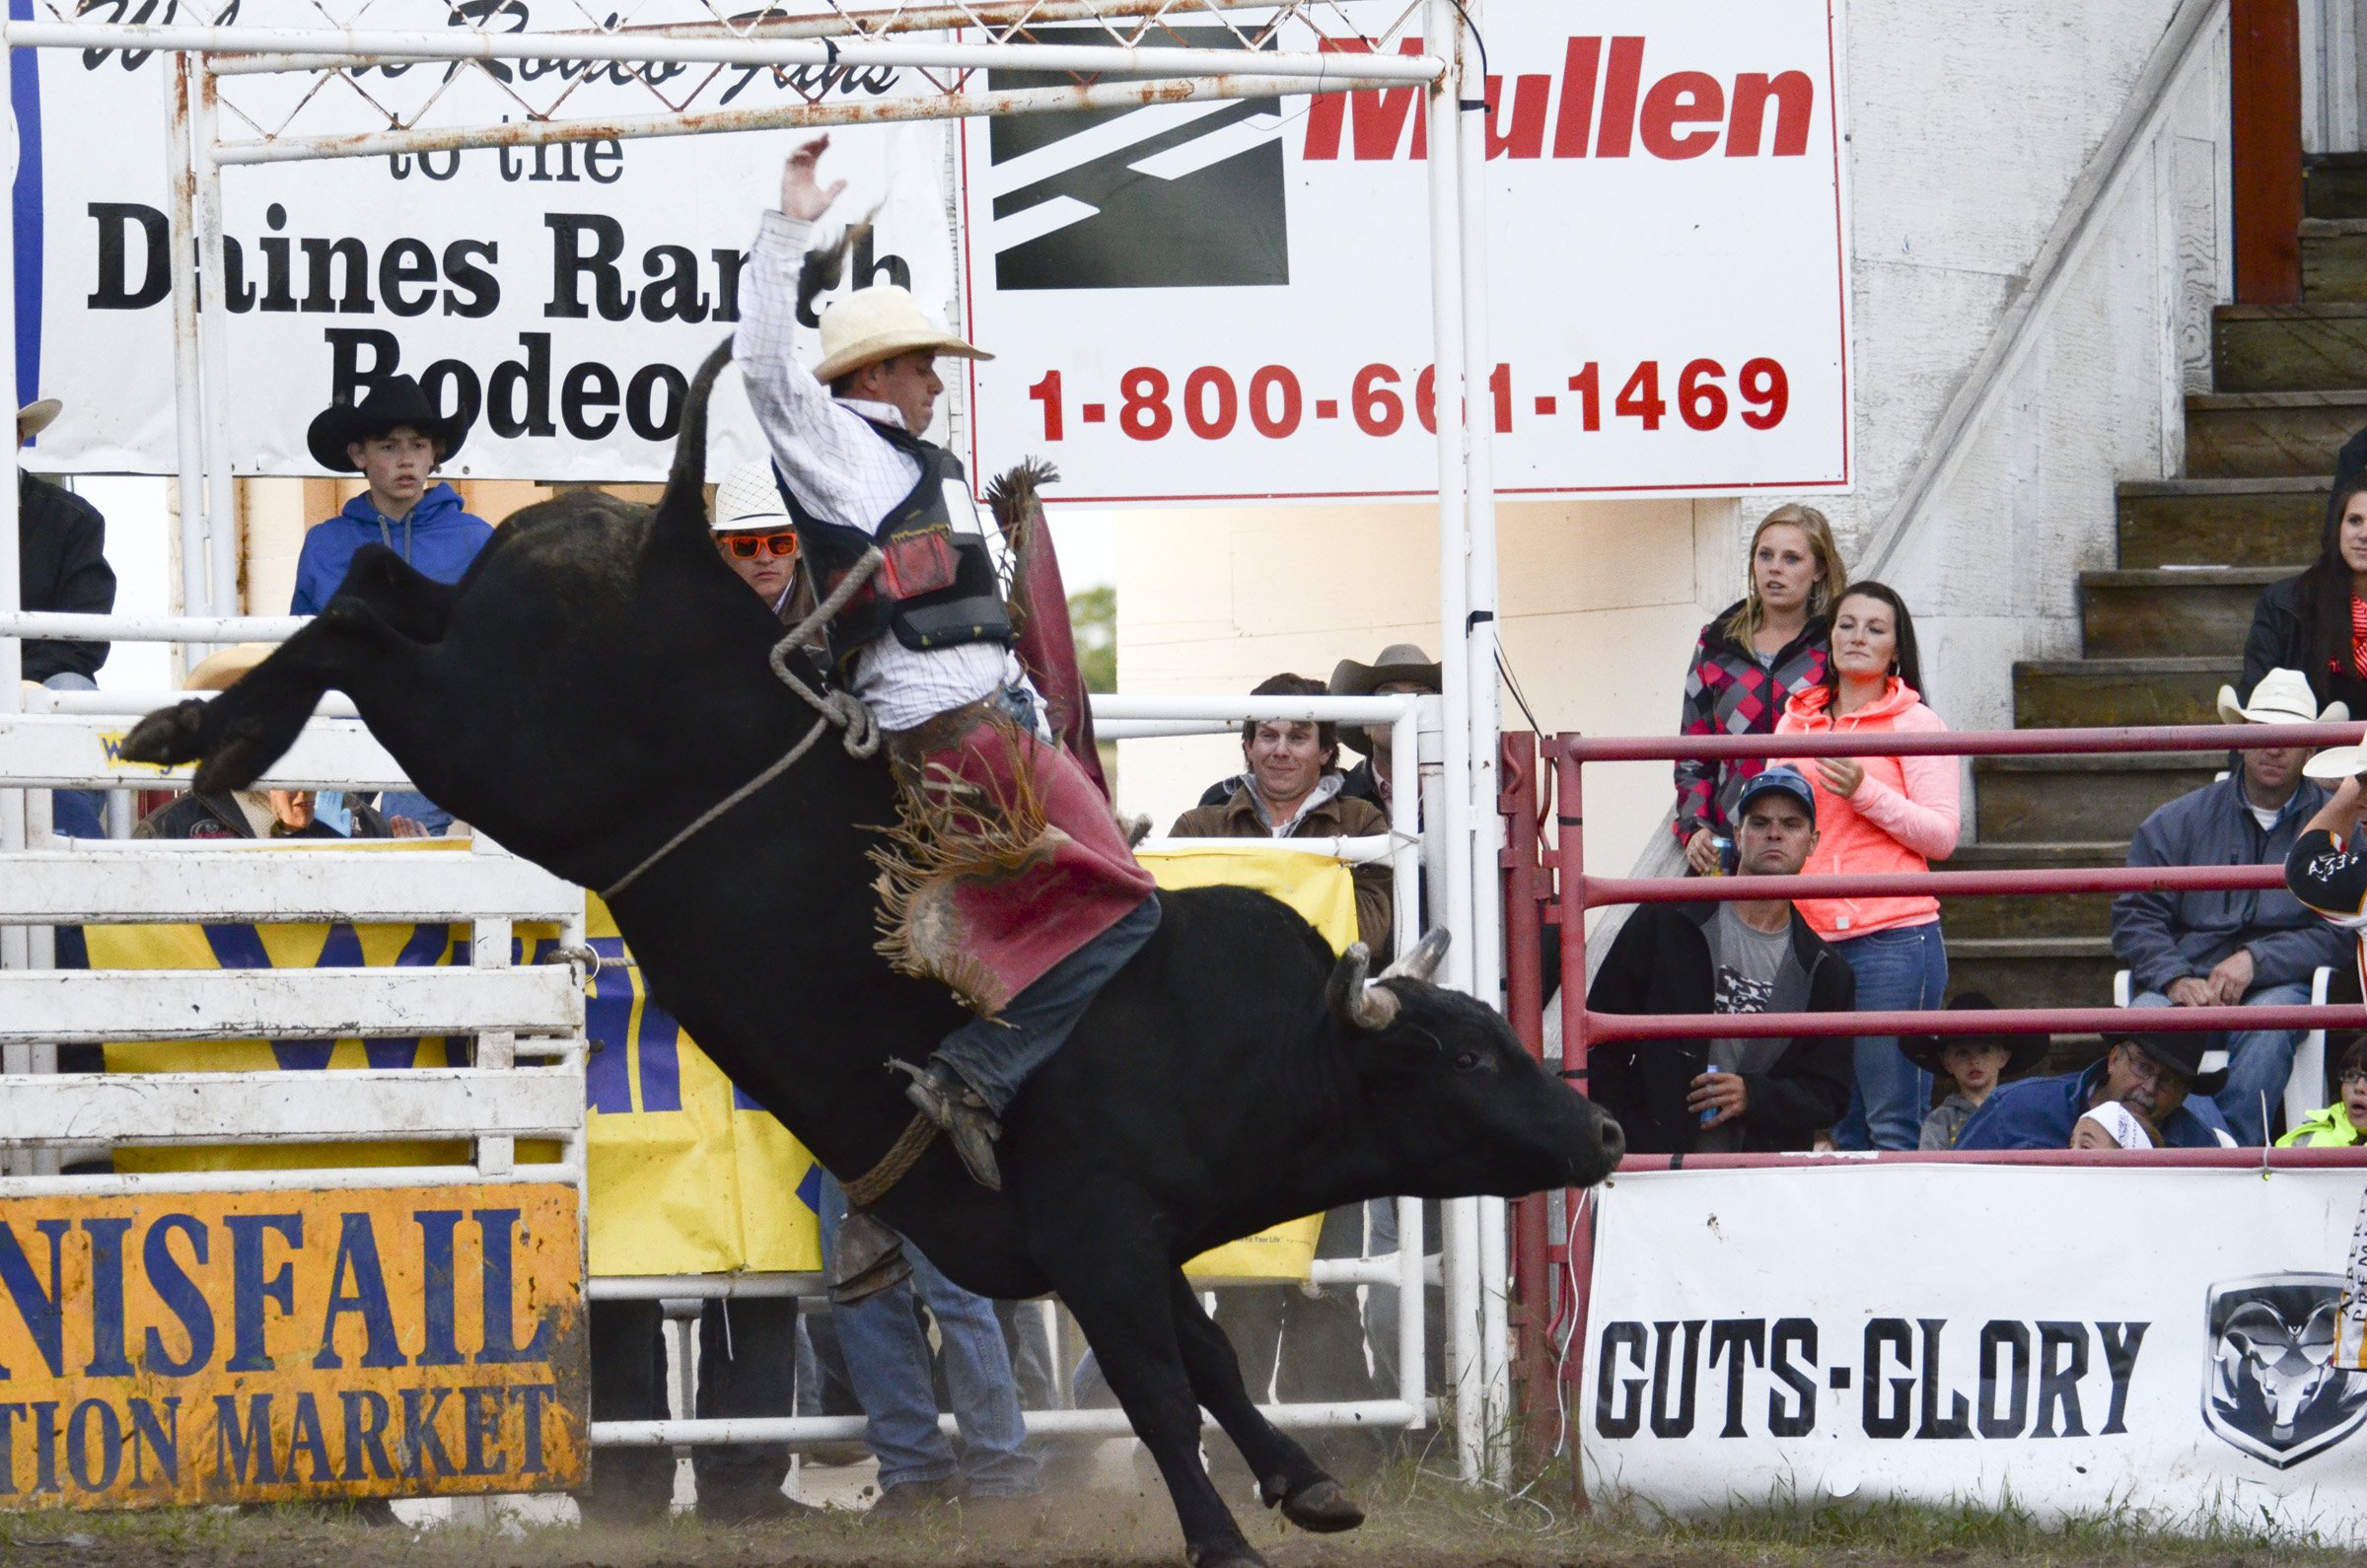 BUCKING BULL - Jared Paulson of Red Deer rode a mean bull at the Daines Ranch Rodeo during a previous event at the grounds.